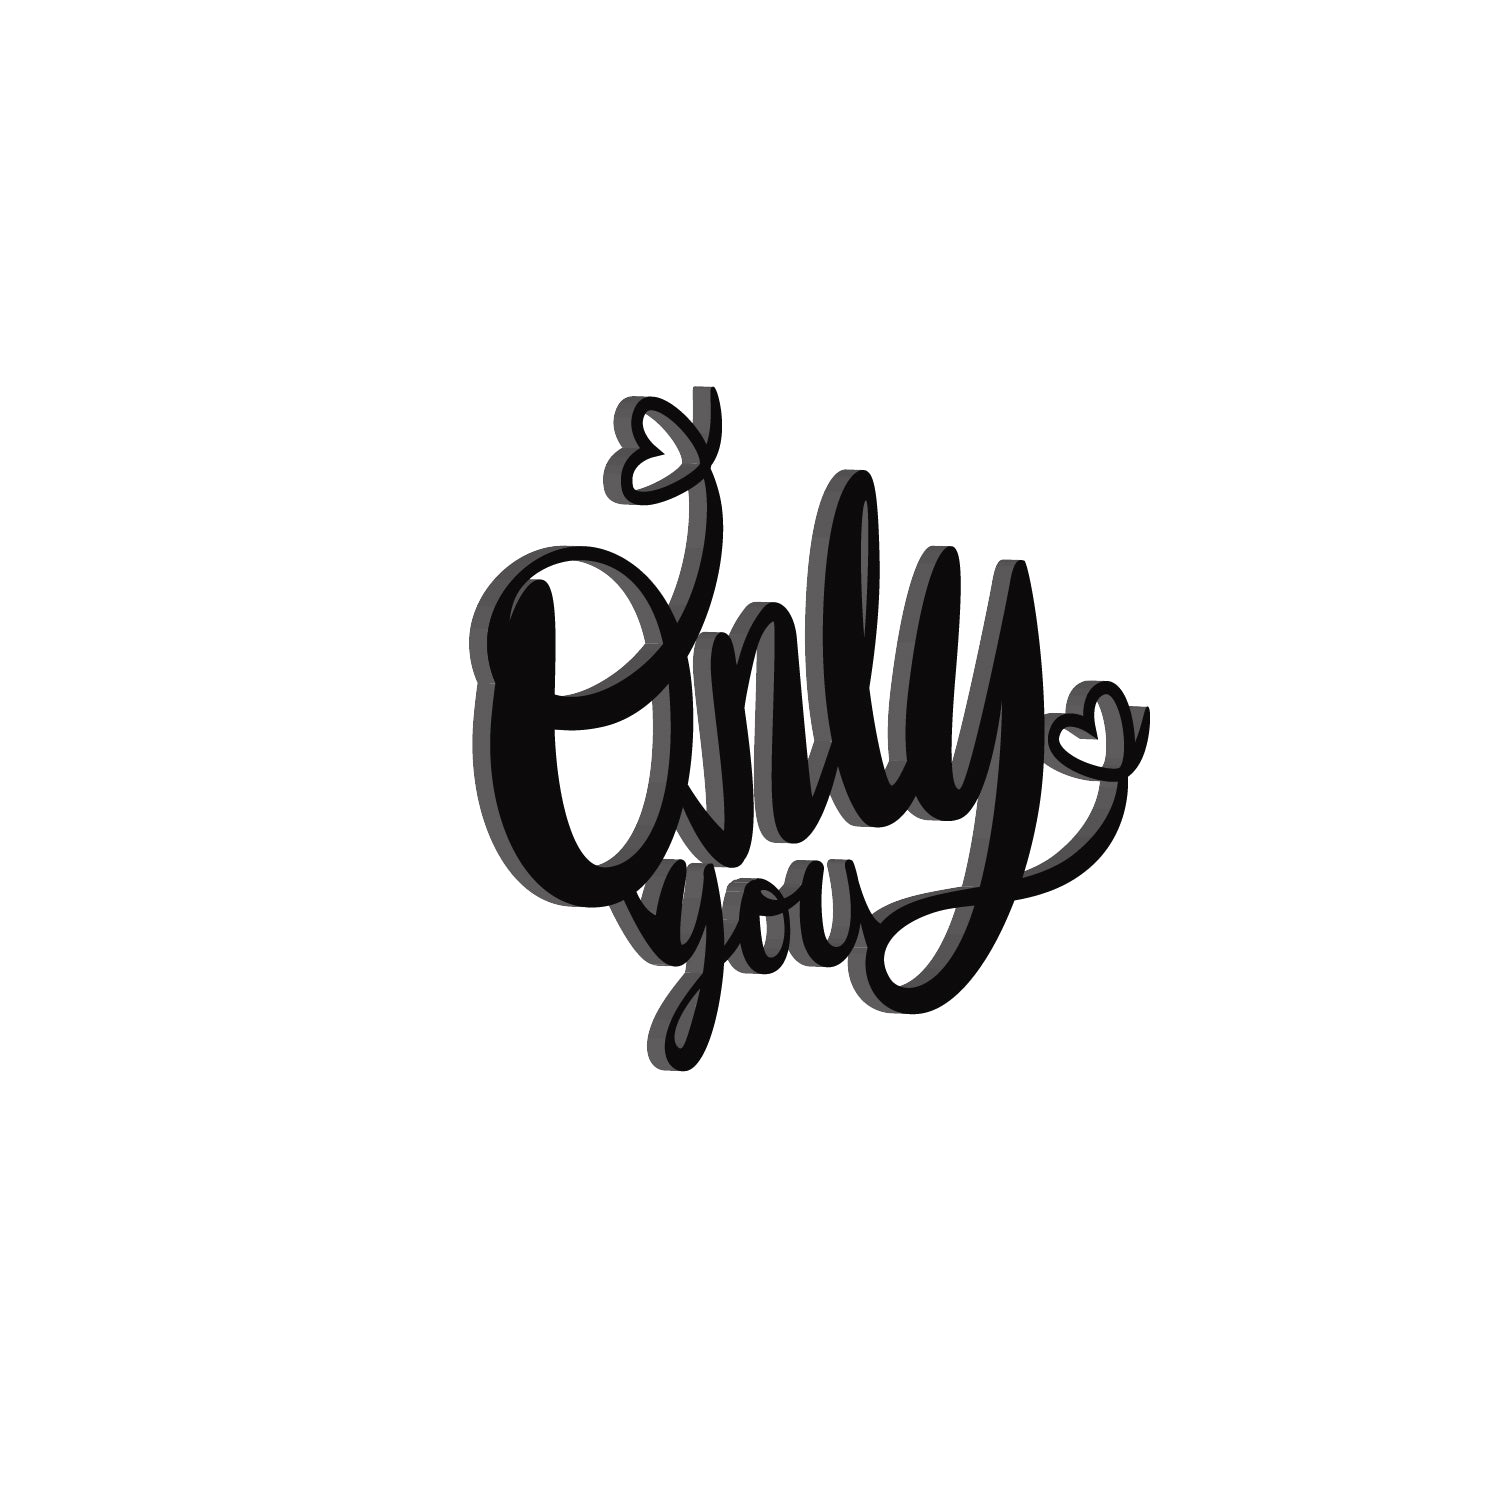 "Only You" Love Theme Black Engineered Wood Wall Art Cutout, Ready to Hang Home Decor 4